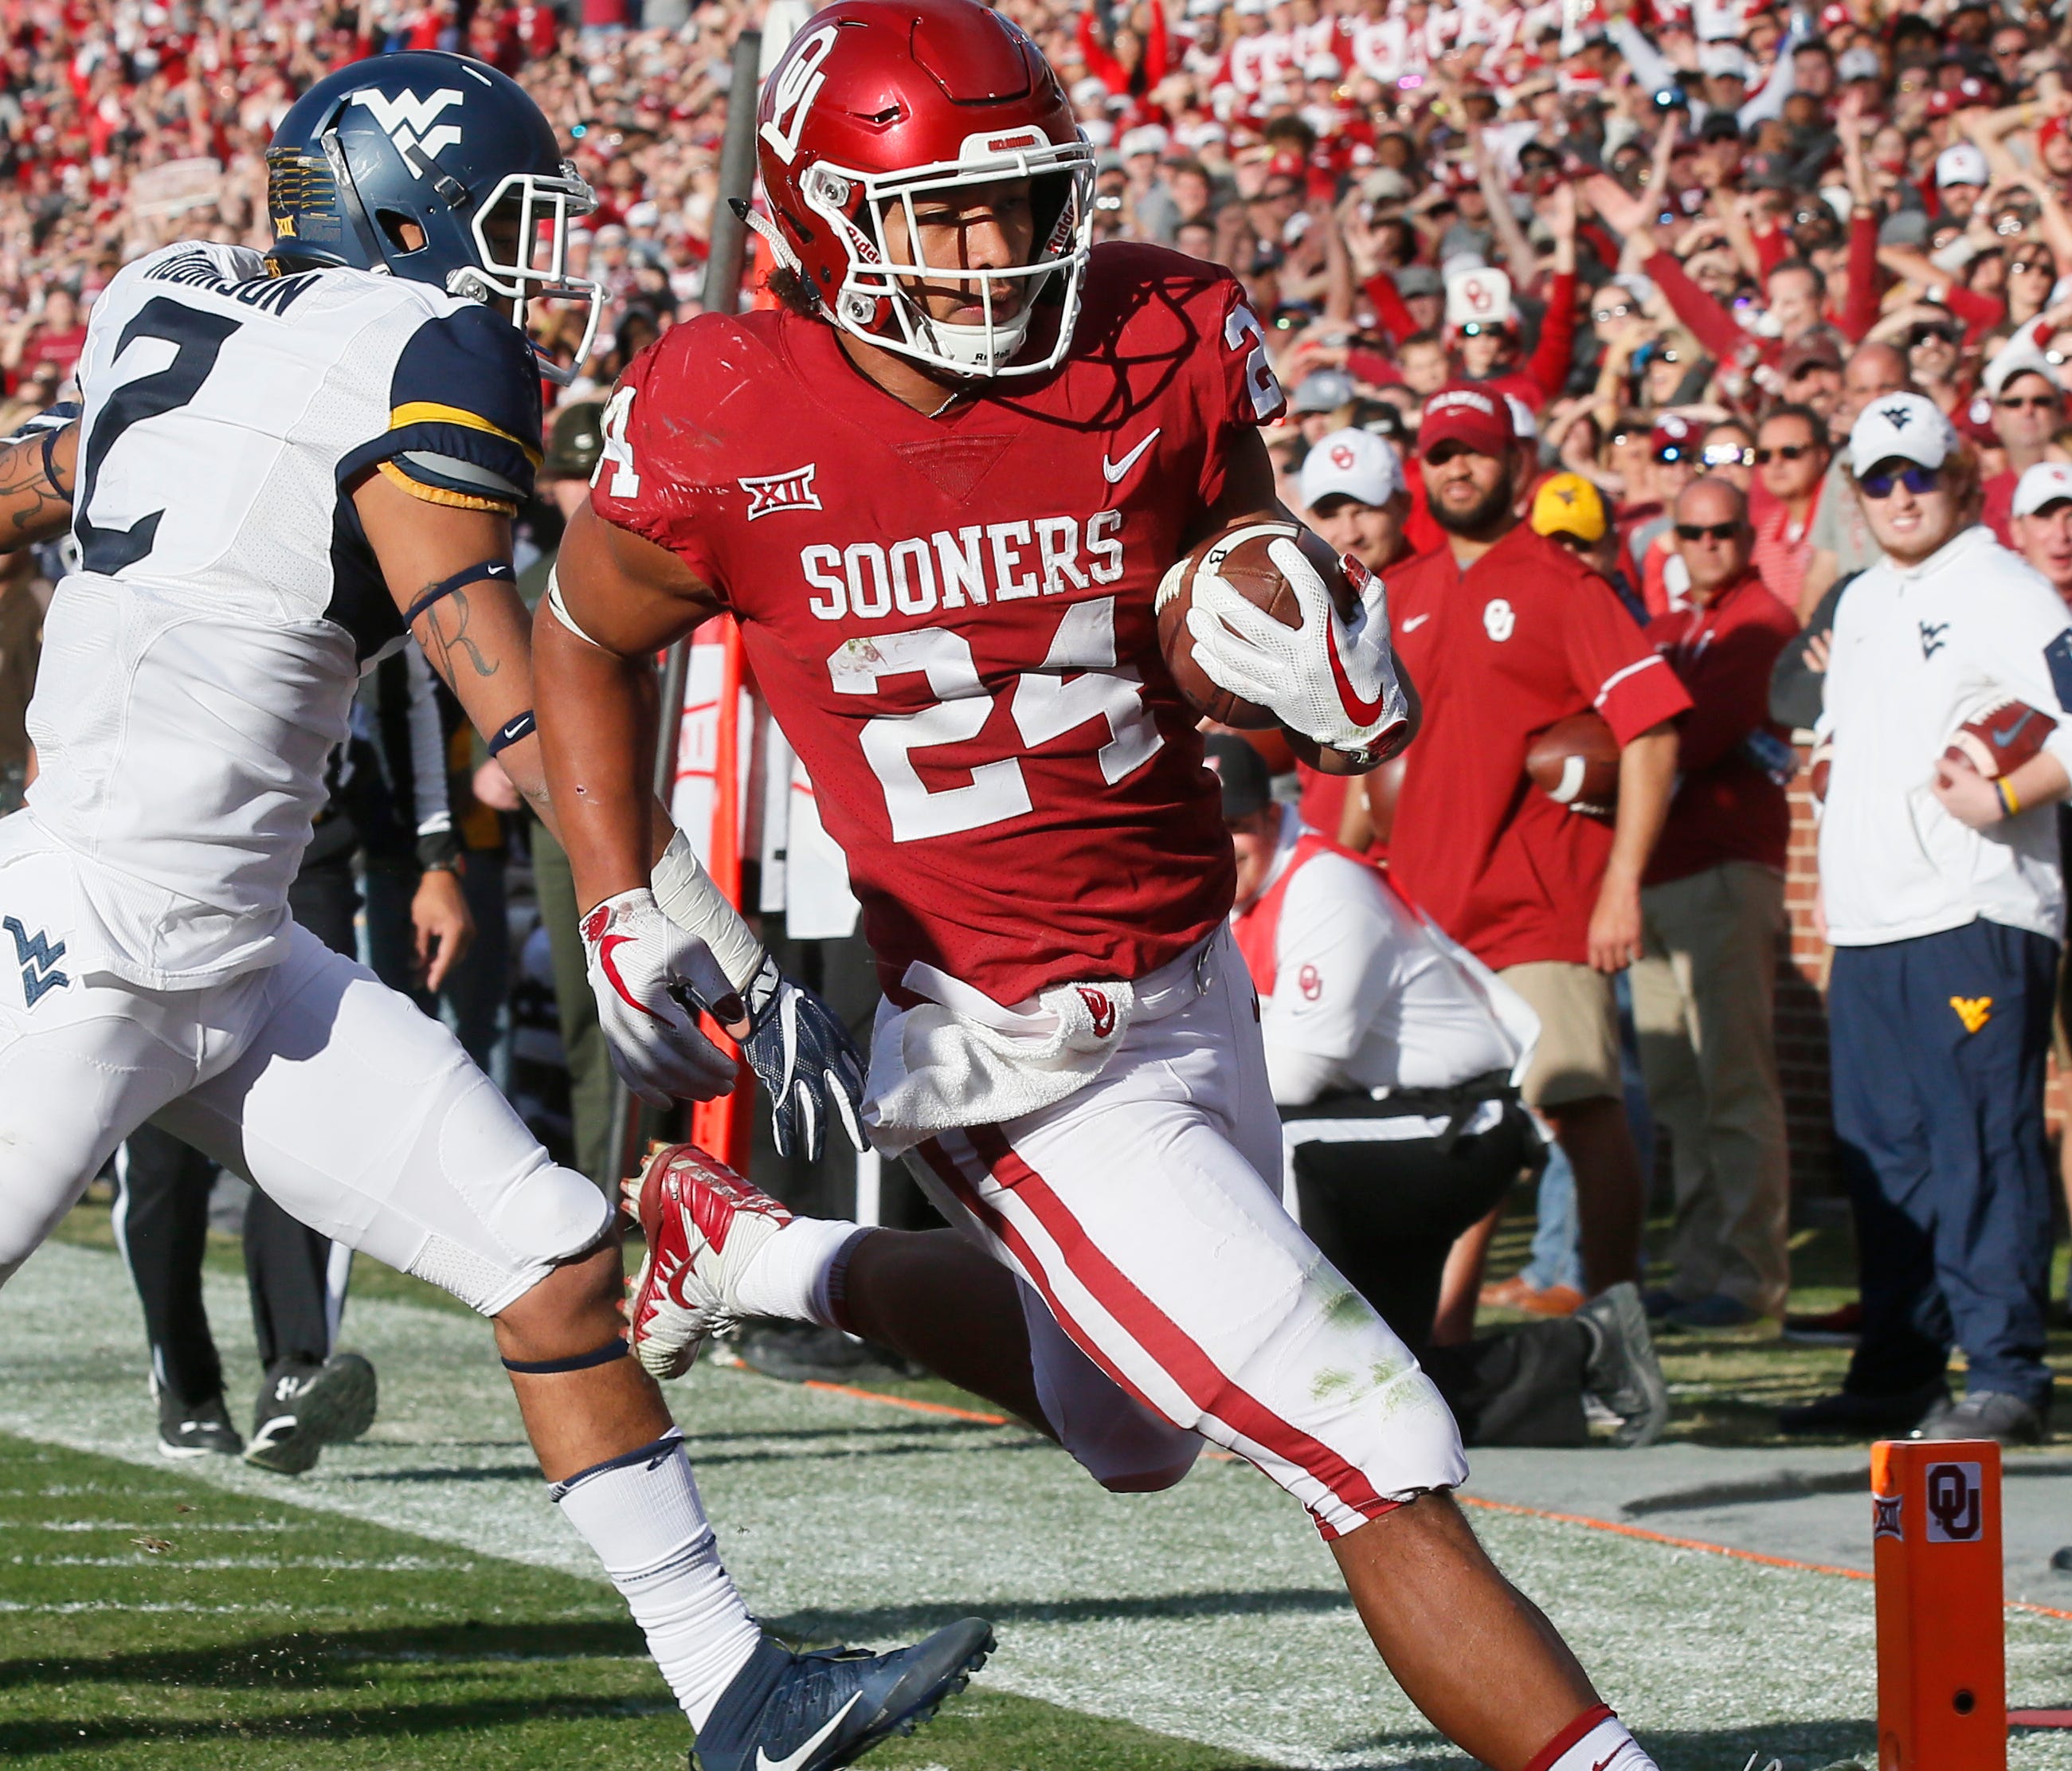 Oklahoma running back Rodney Anderson (24) scores in front of West Virginia safety Kenny Robinson (2) in the first quarter of an NCAA college football game in Norman, Okla., Saturday, Nov. 25, 2017. (AP Photo/Sue Ogrocki)